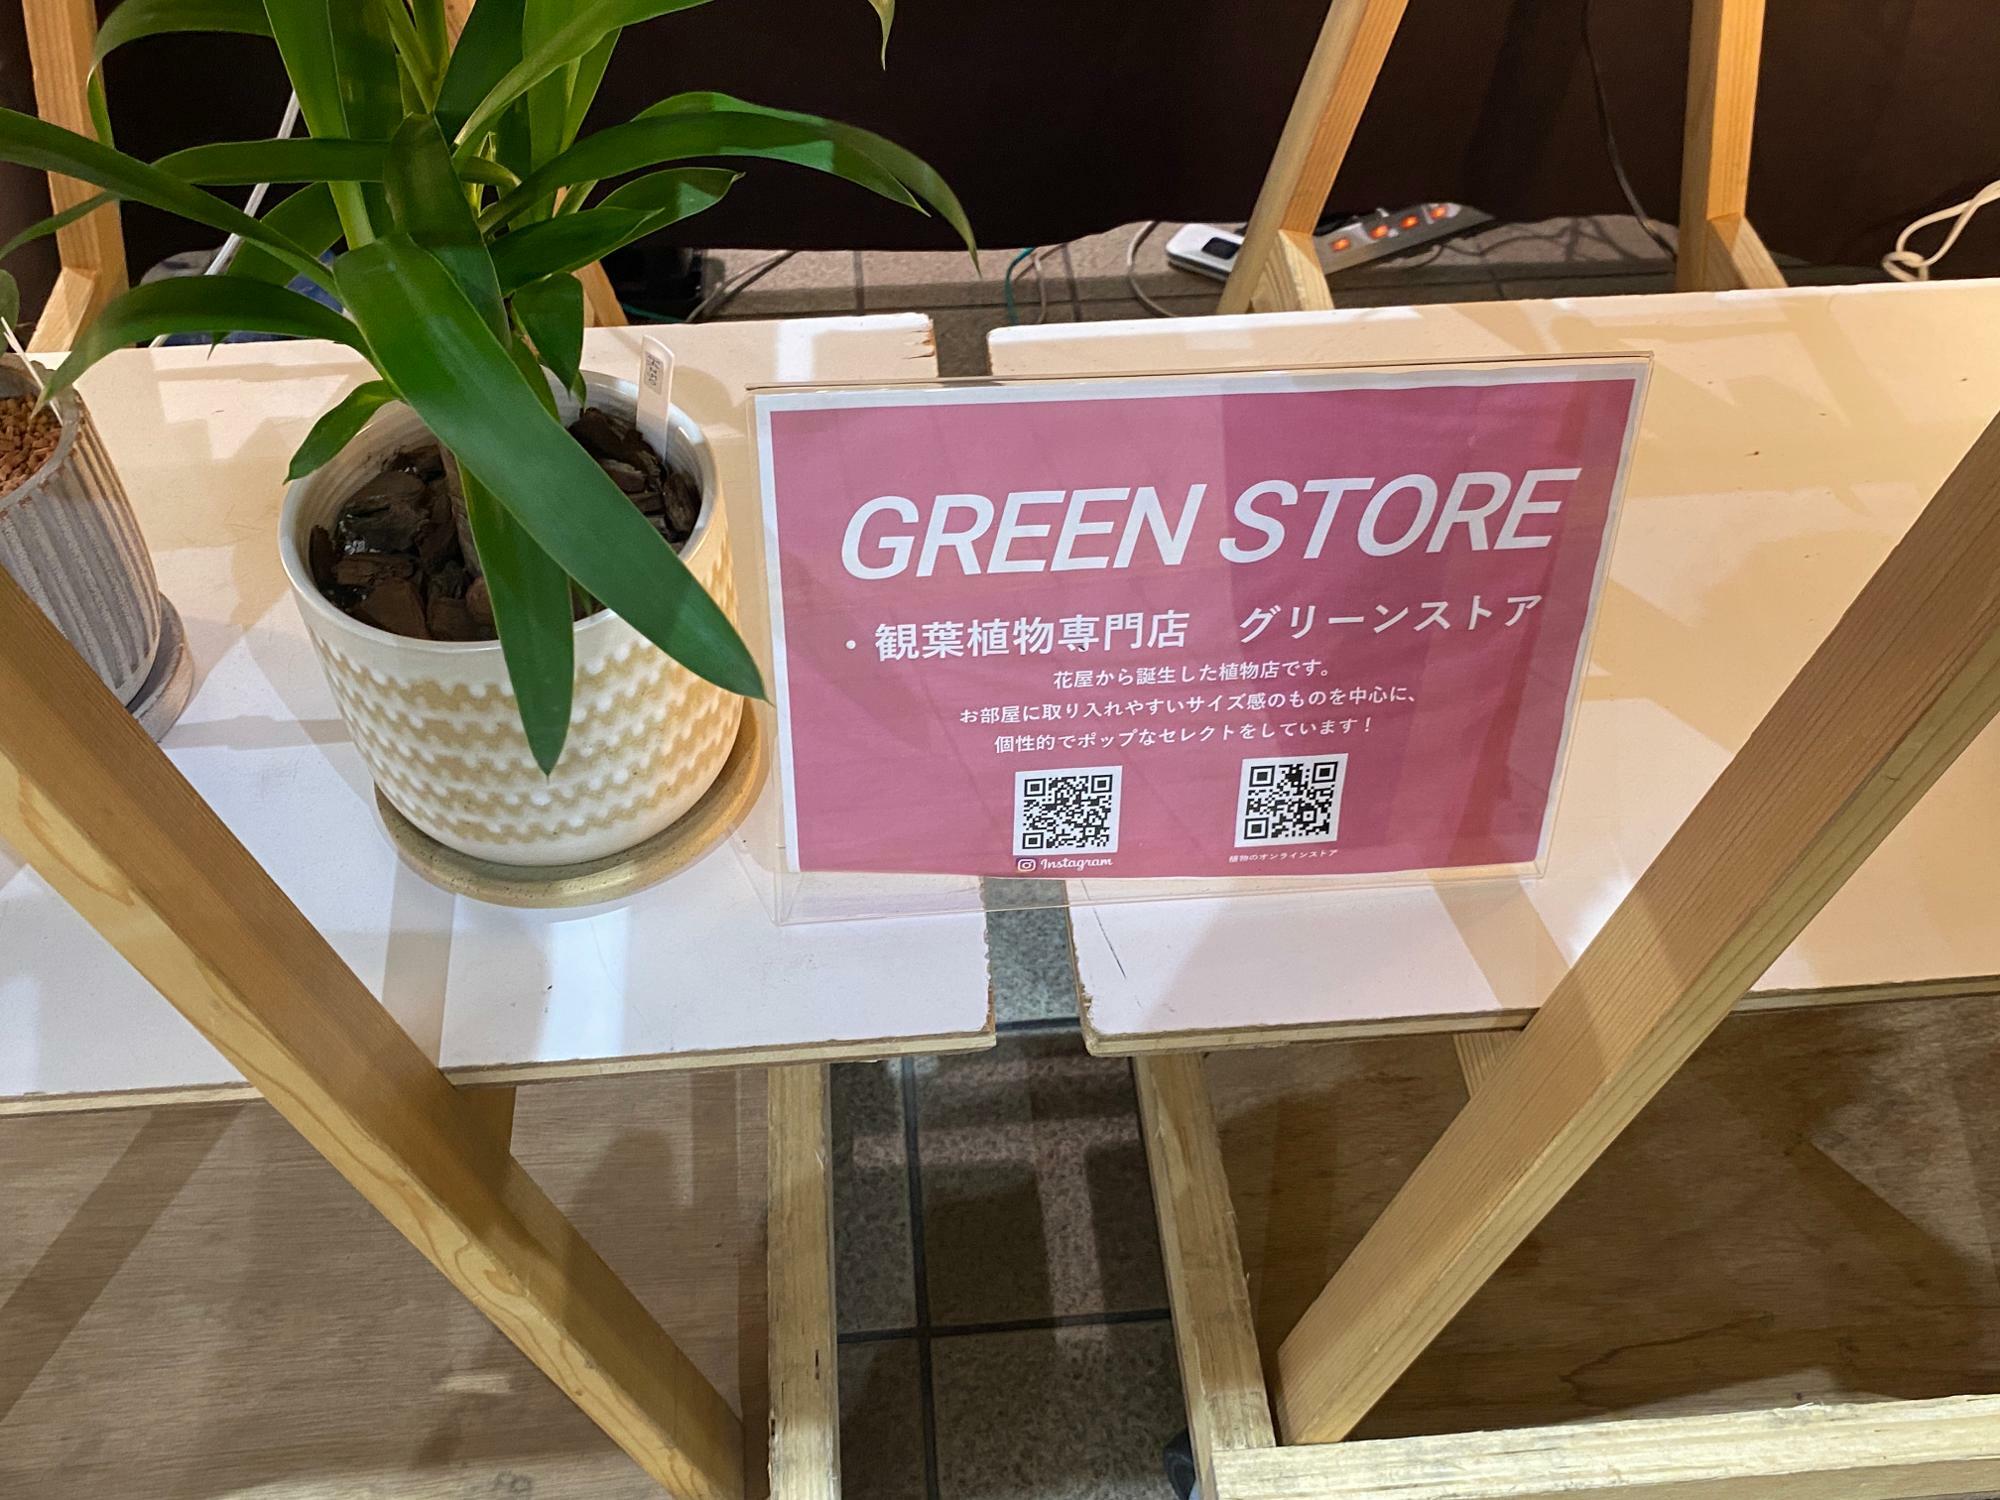 GREEN STOREの看板